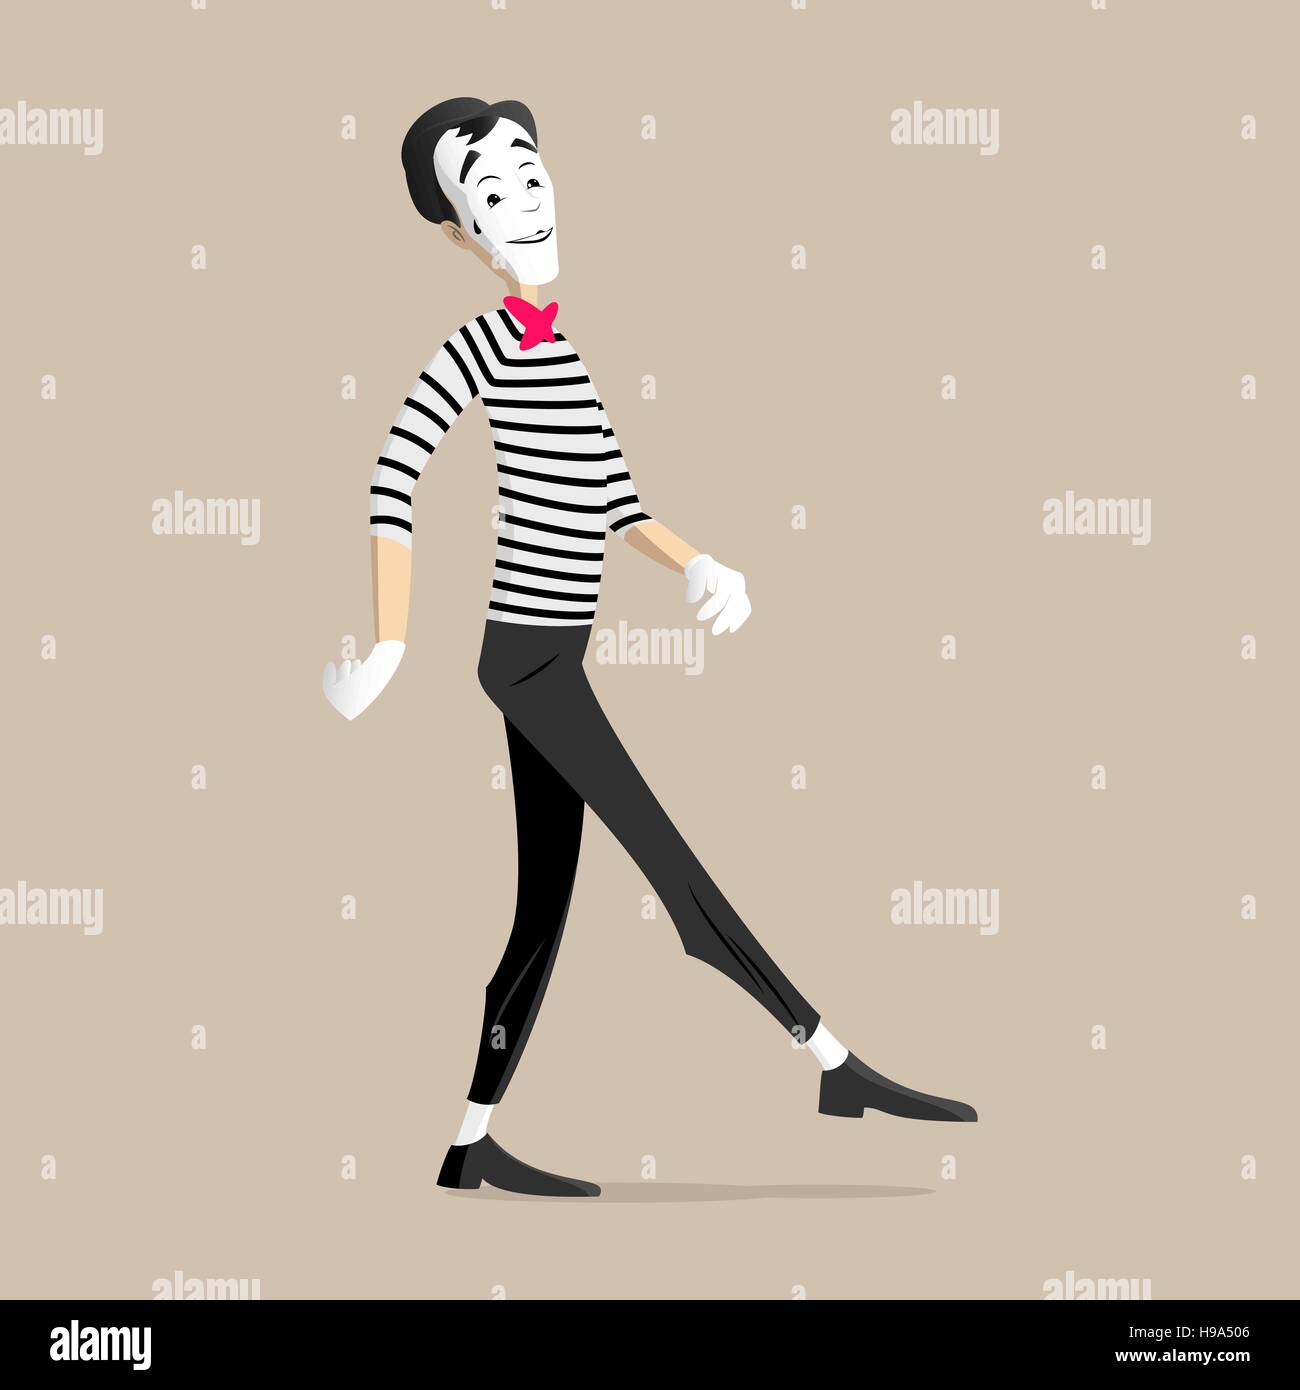 A Mime performing a pantomime called a walking in place Stock Vector